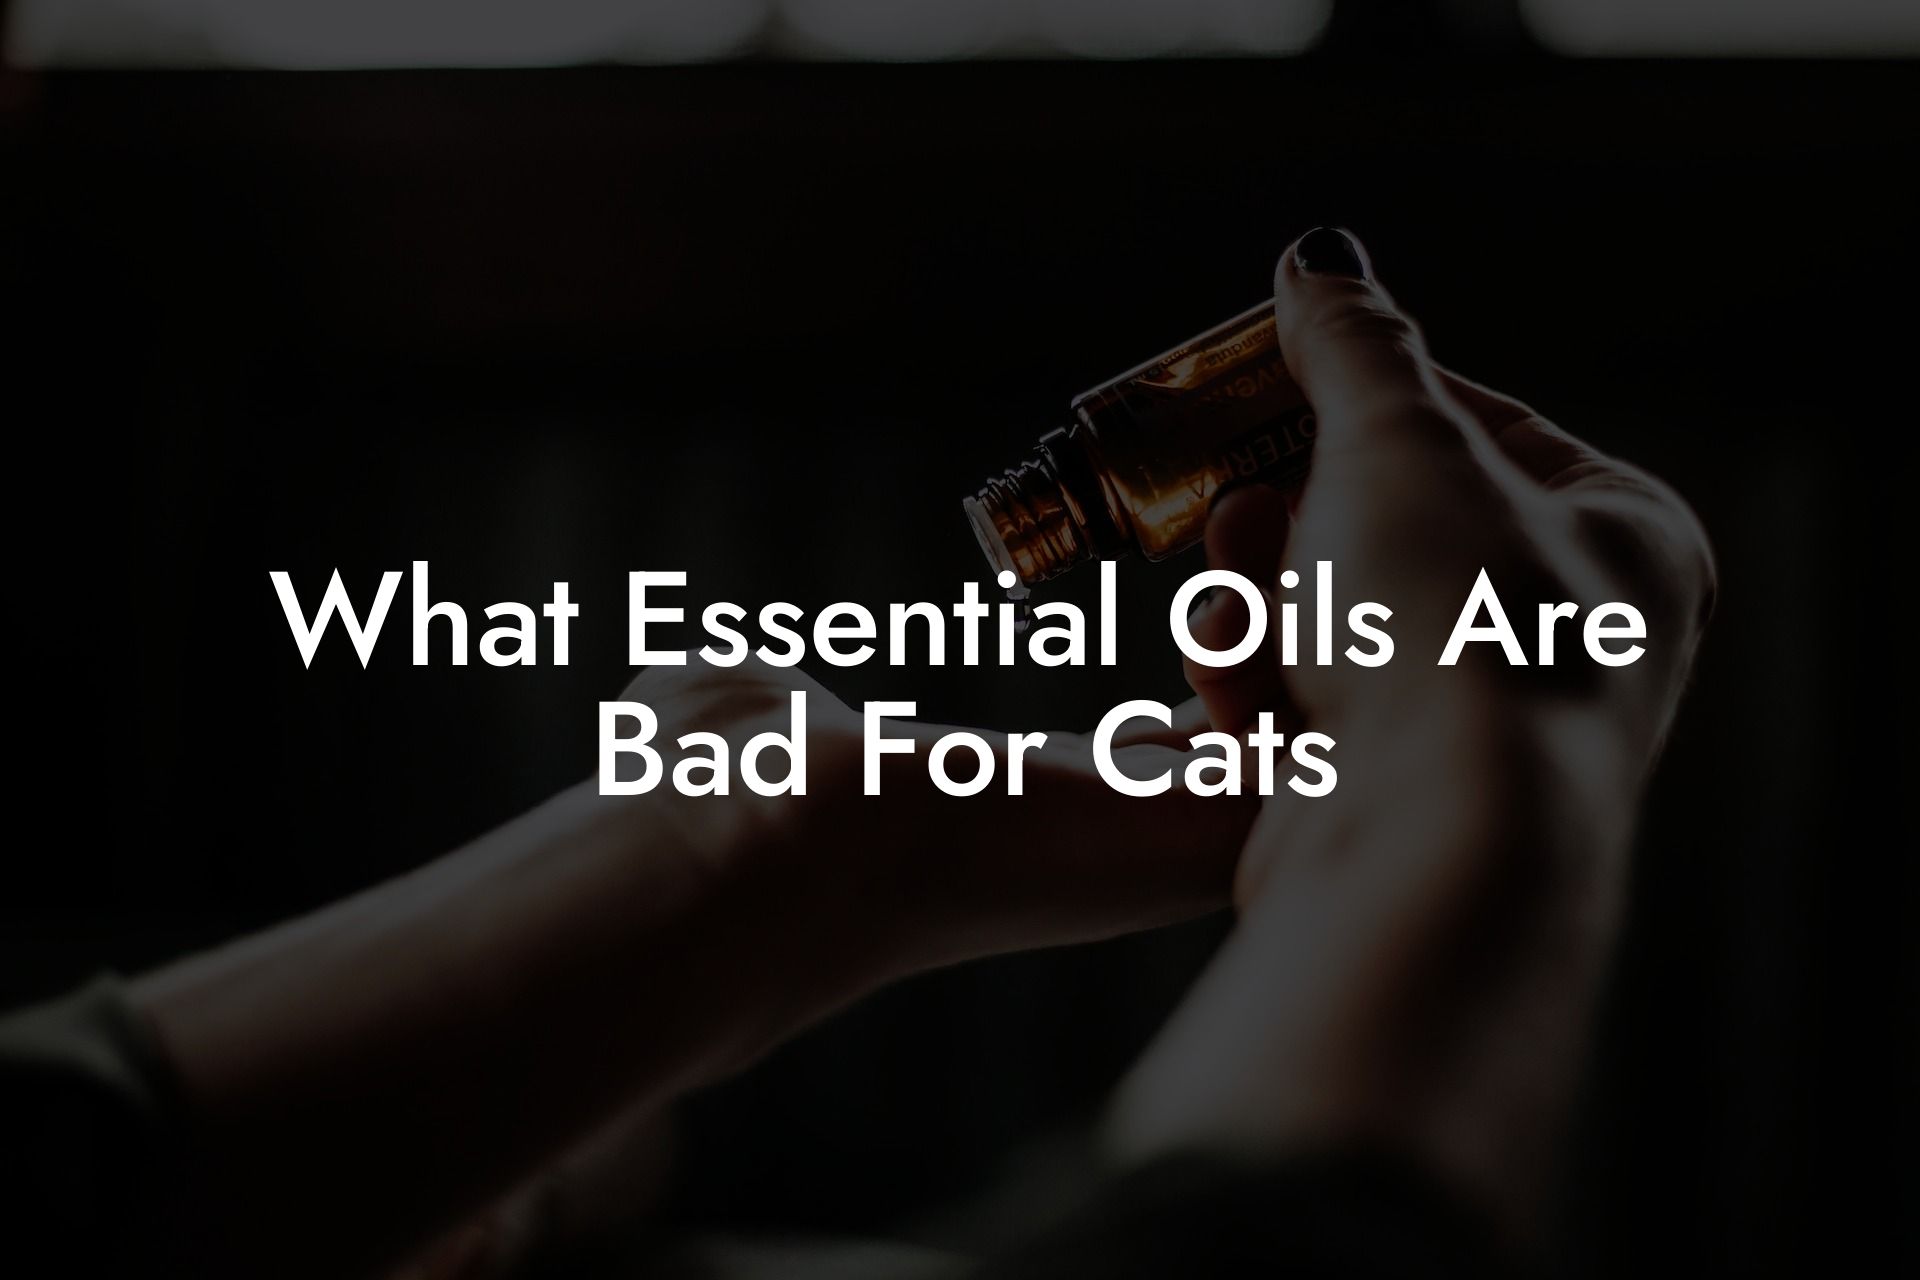 What Essential Oils Are Bad For Cats